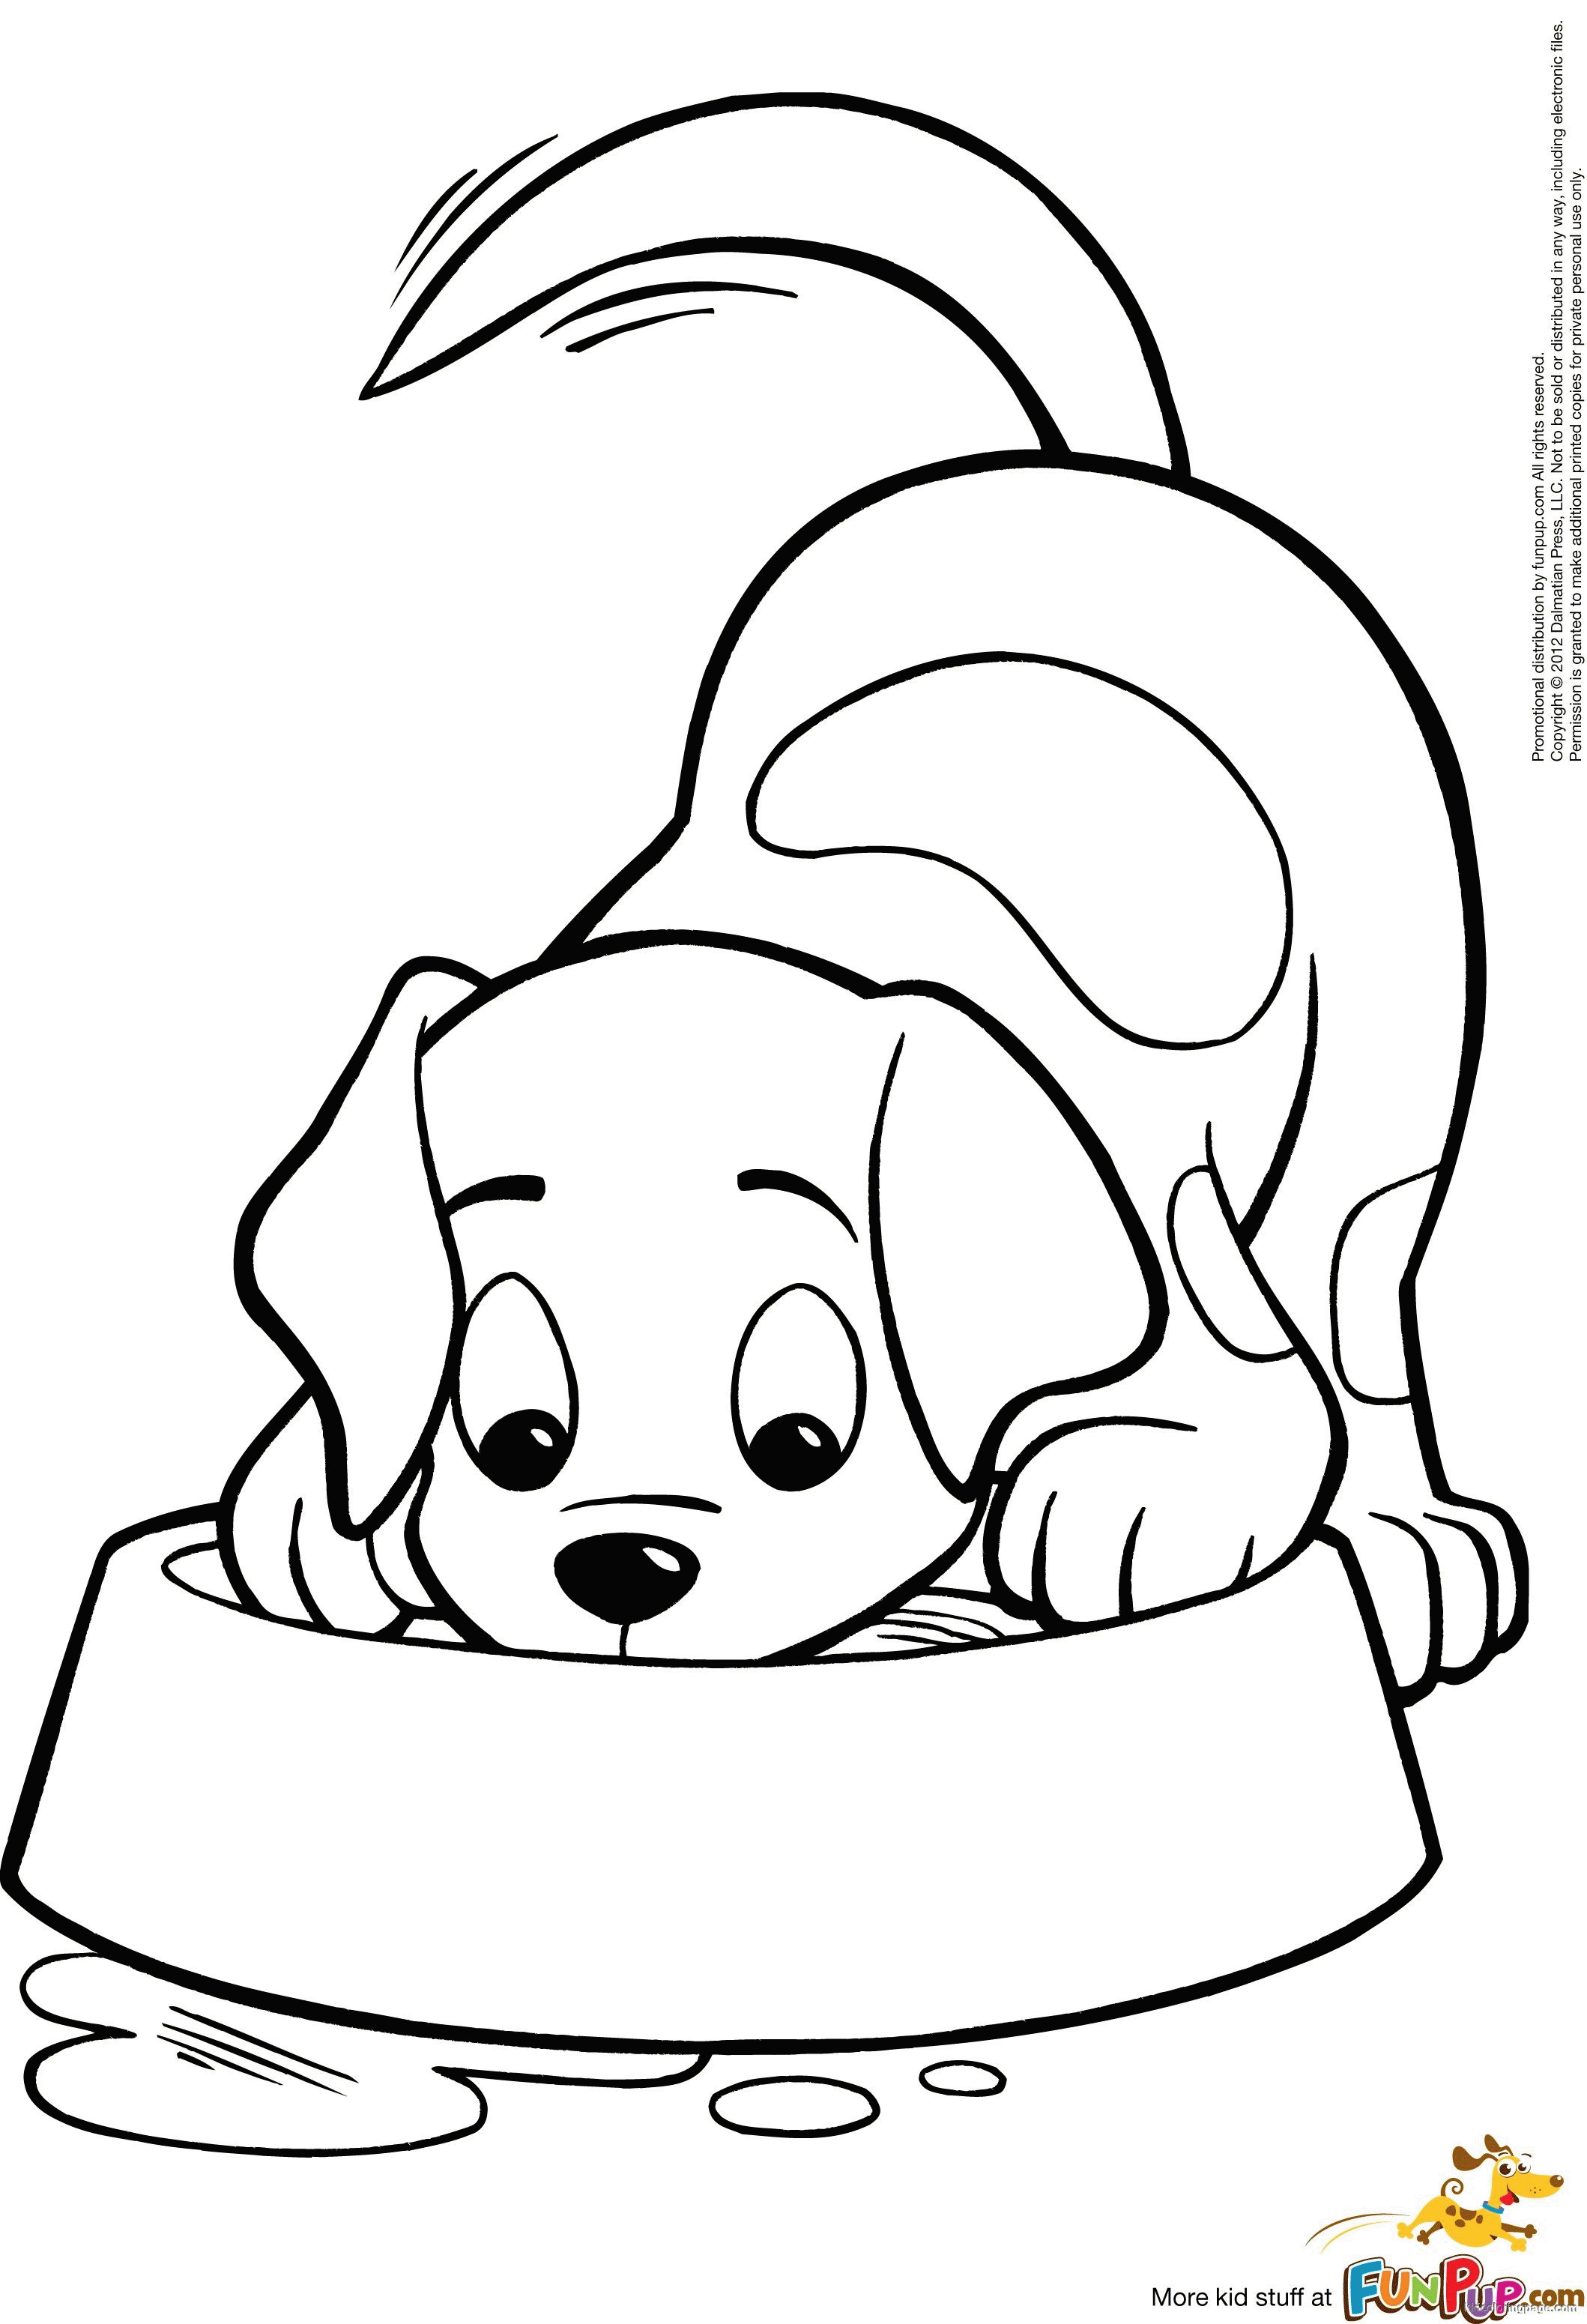 Cute Puppy Coloring Pages To Print   Free Coloring Pages Printable ...